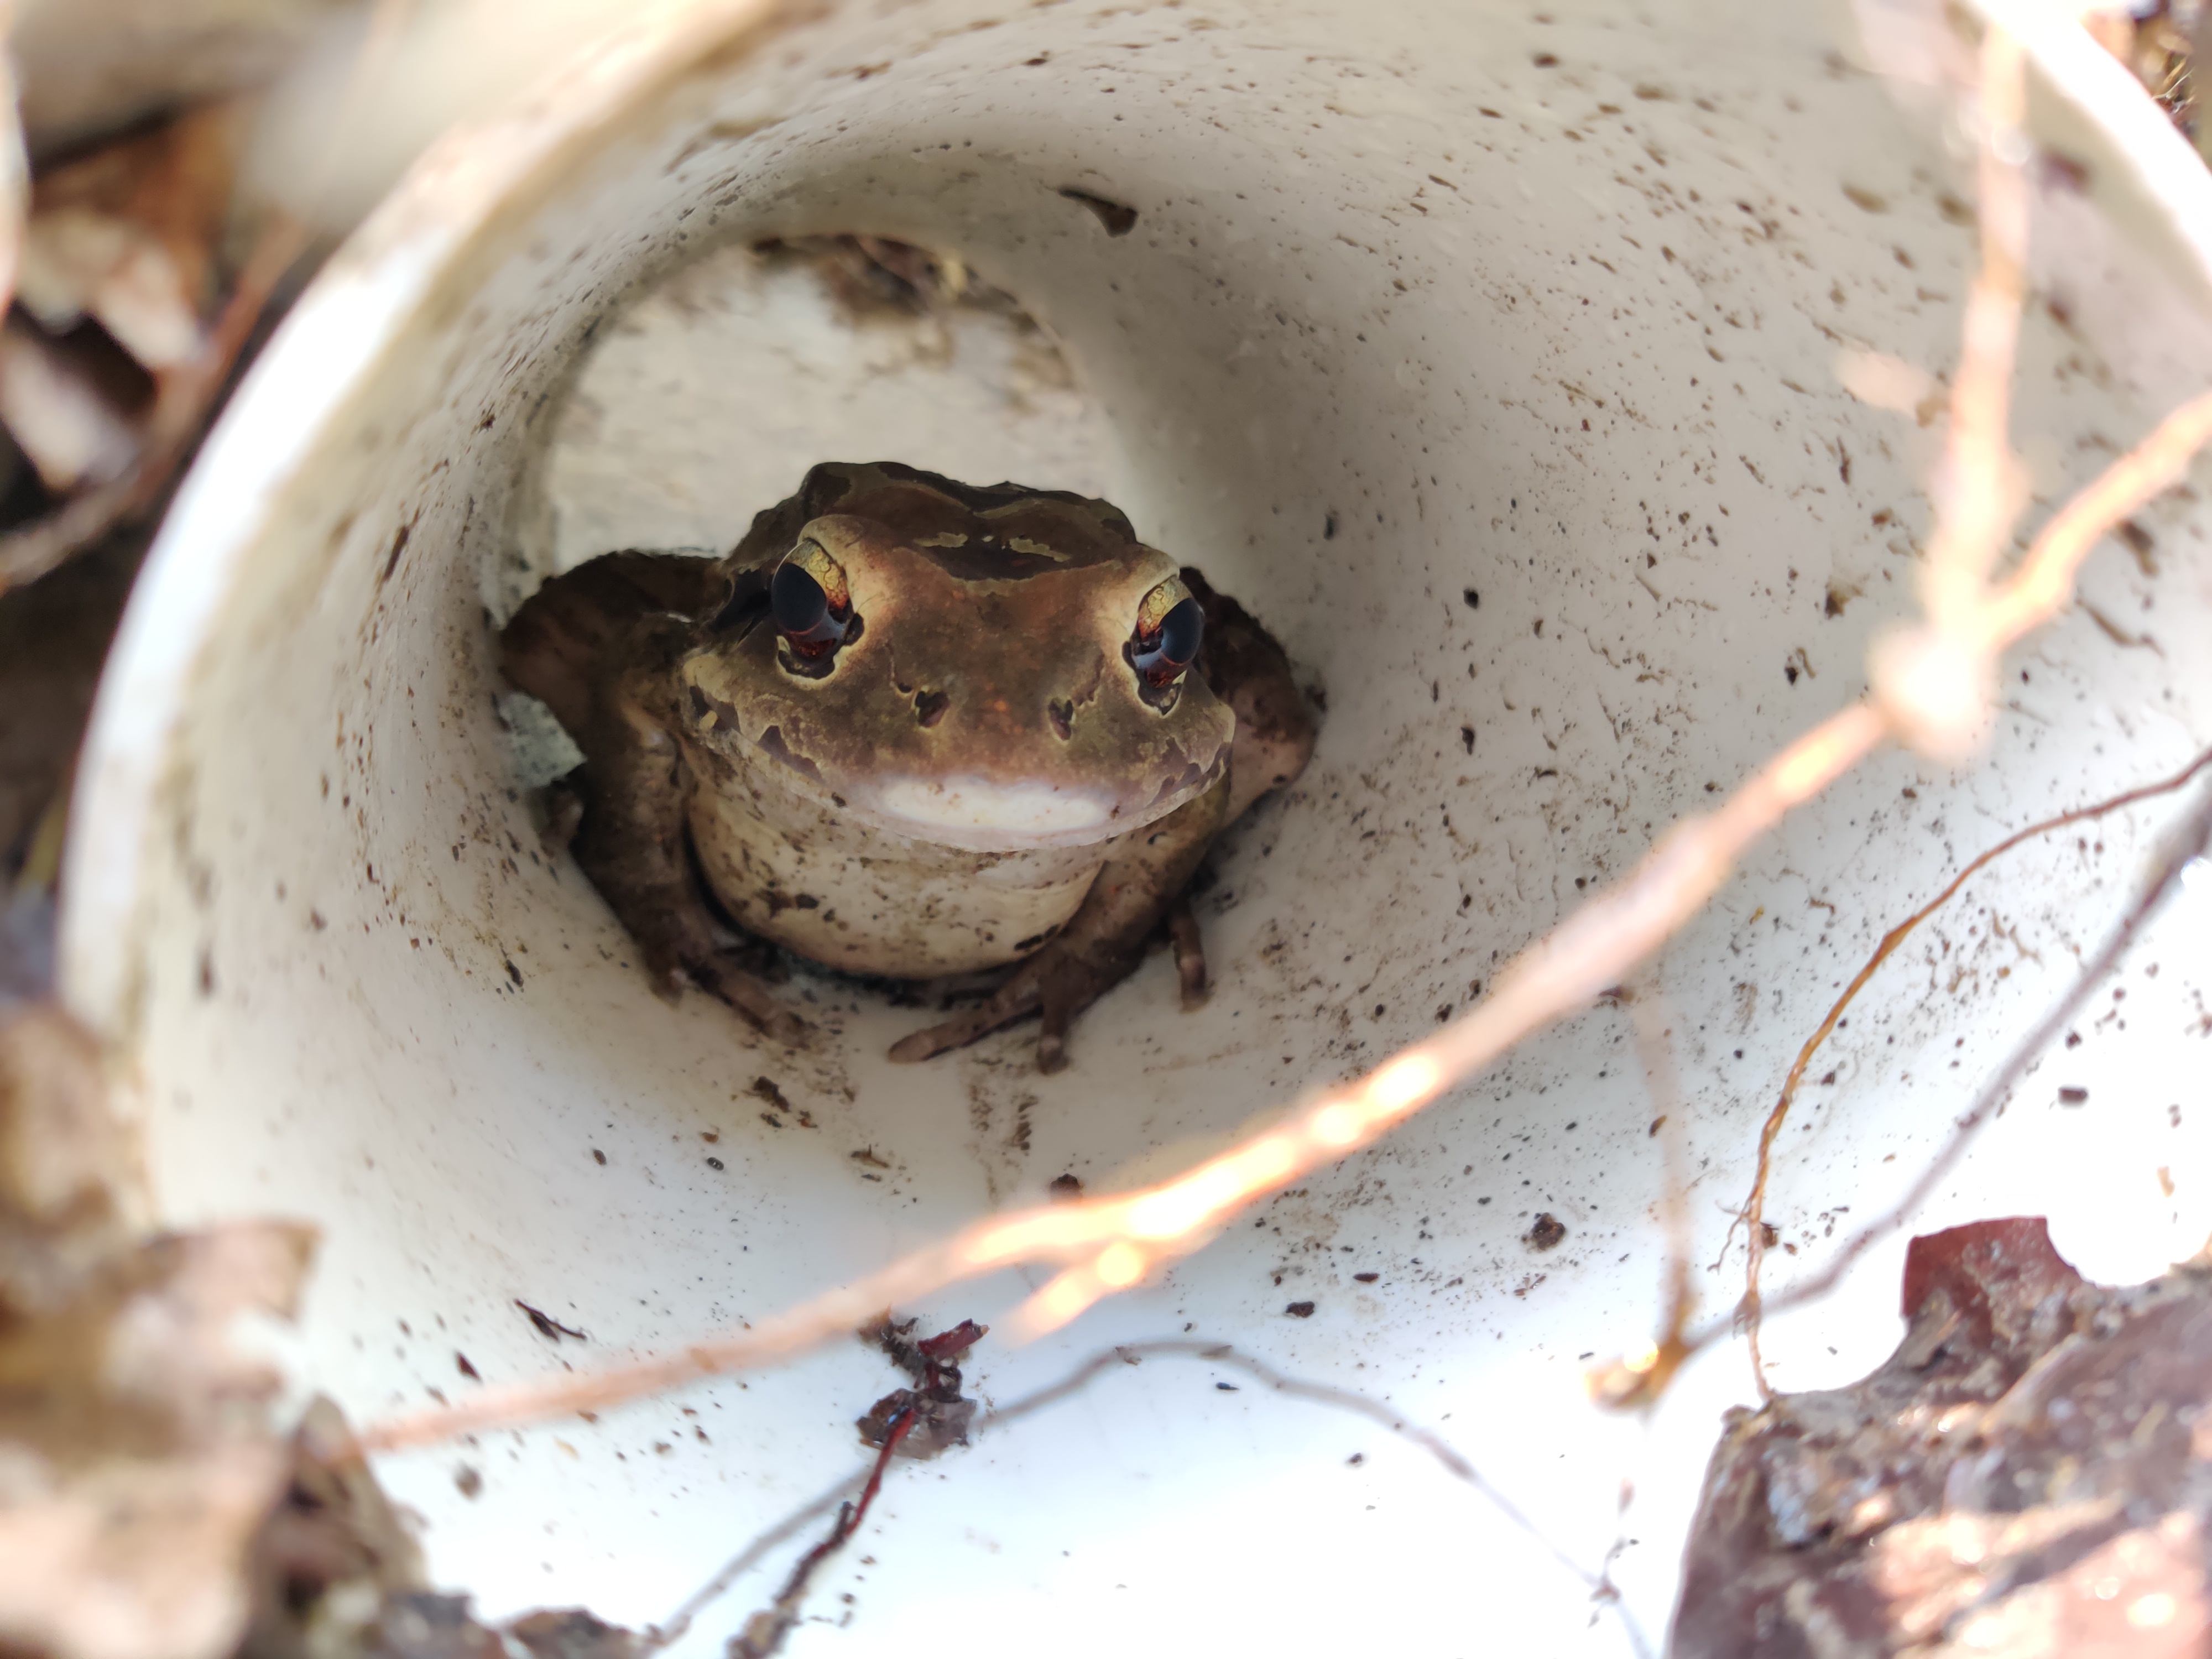 Safe haven created for Critically Endangered frog in Montserrat